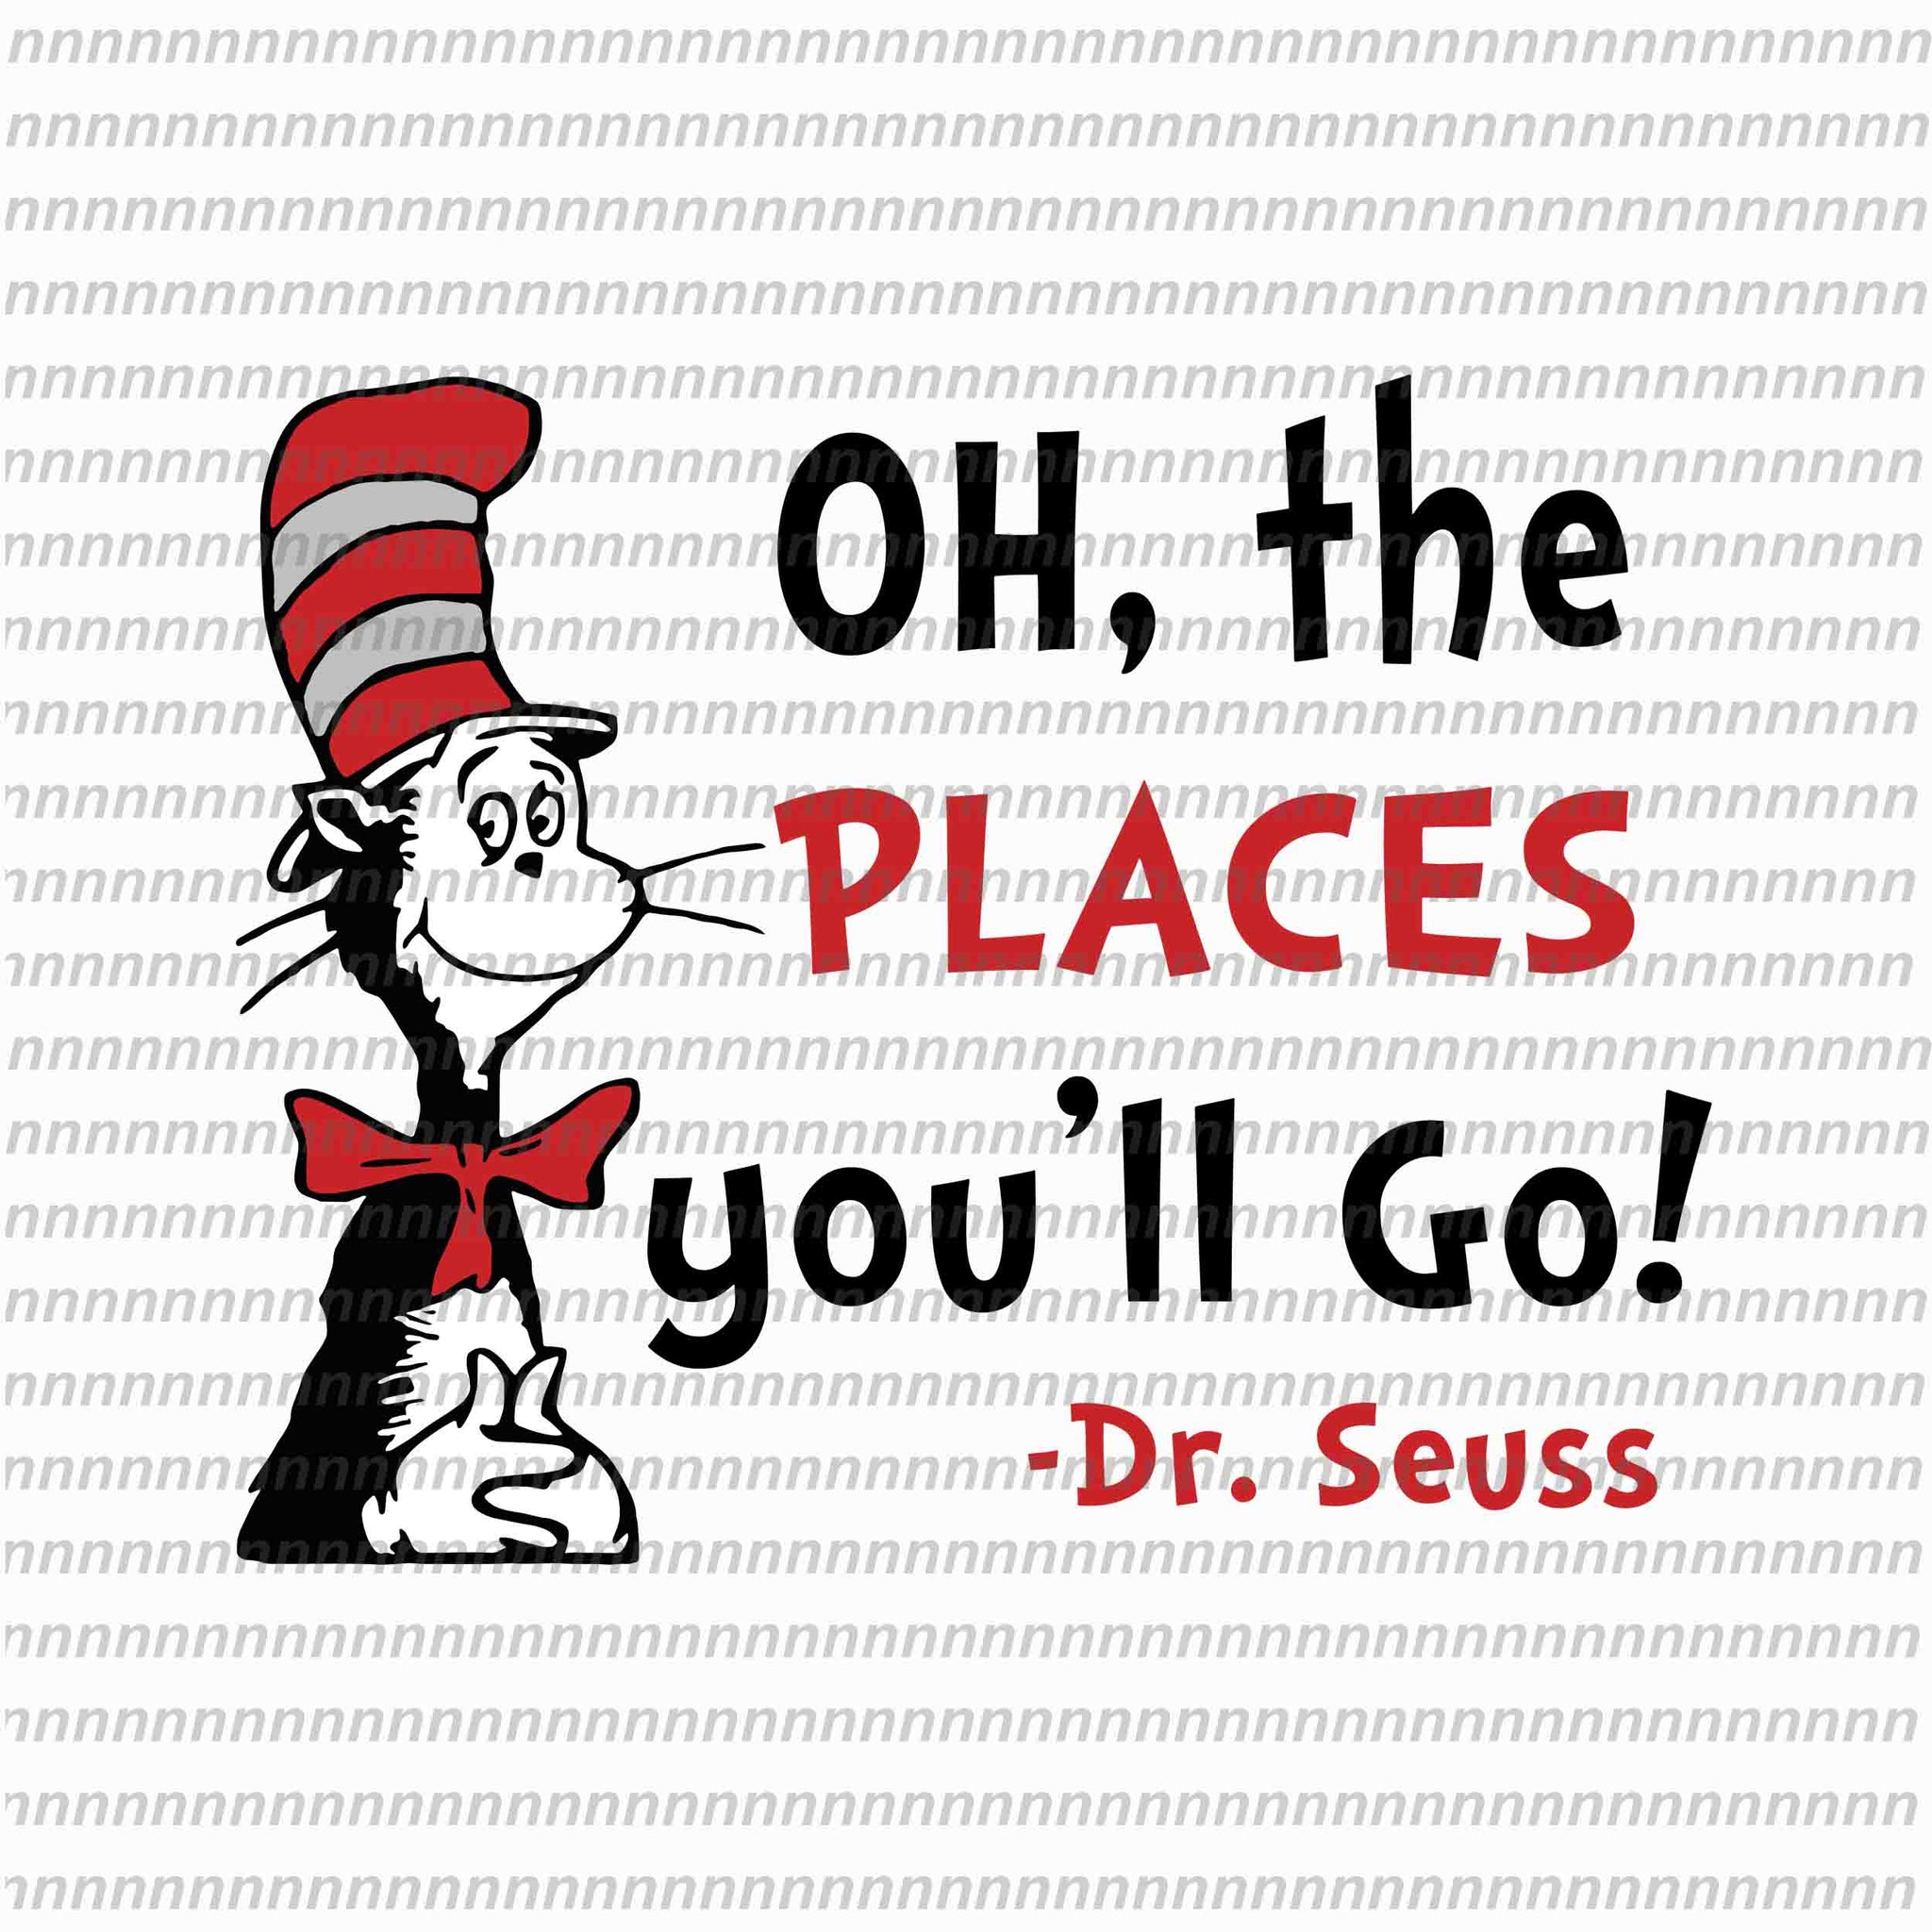 Oh the places youll go dr seuss, dr seuss svg, dr seuss quote, dr seuss design, Cat in the hat svg, thing 1 thing 2 thing 3, svg, png, dxf, eps file